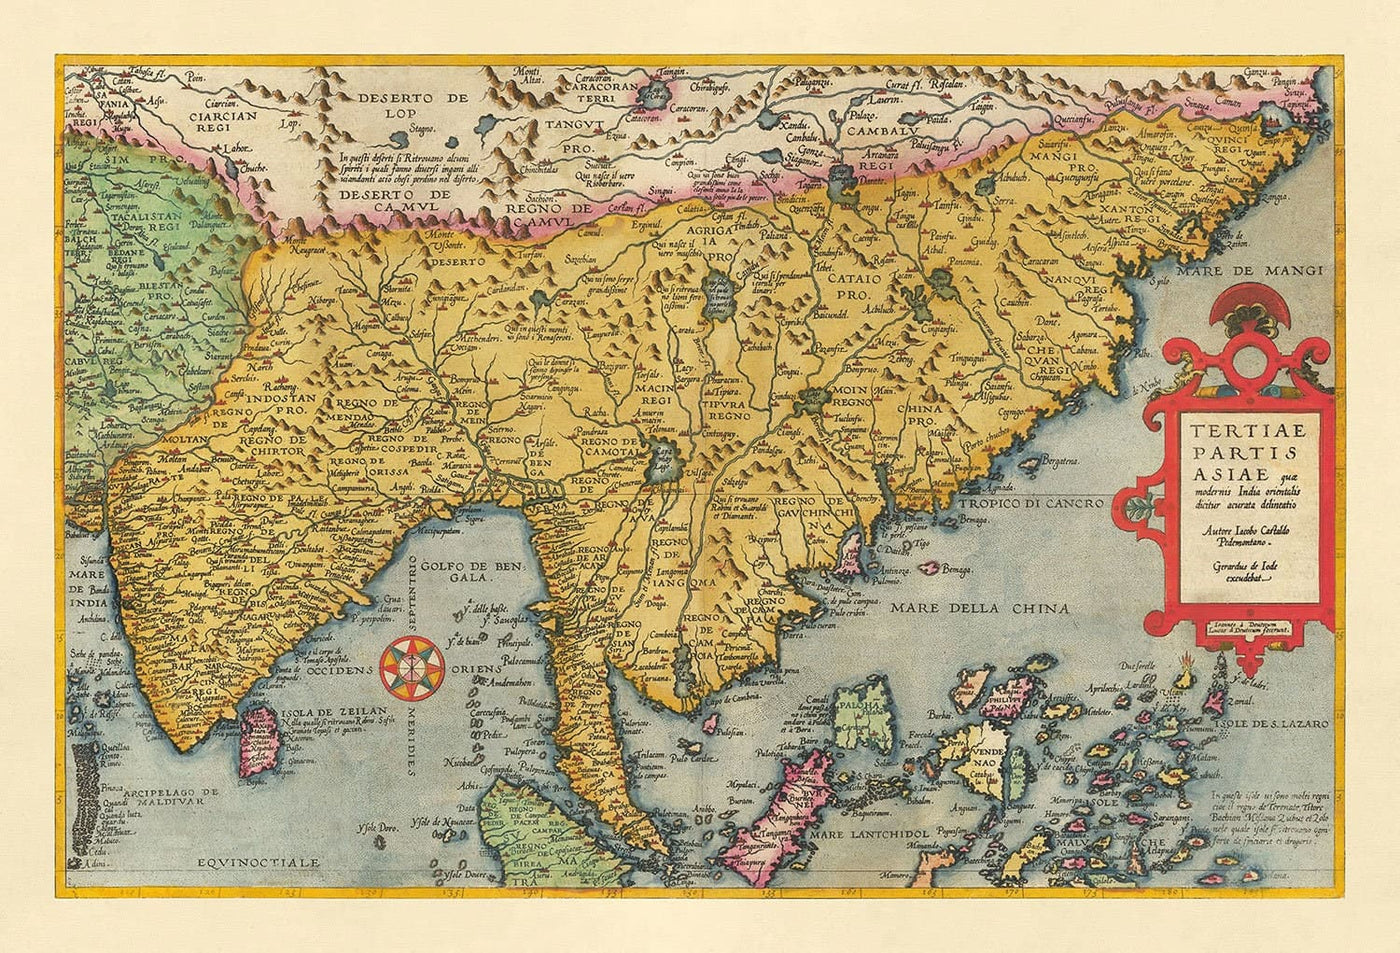 Old Map of India and East Asia, 1593 by de Jode - China, Nepal, Laos, Thailand, Sri Lanka, Philippines, Malaysia